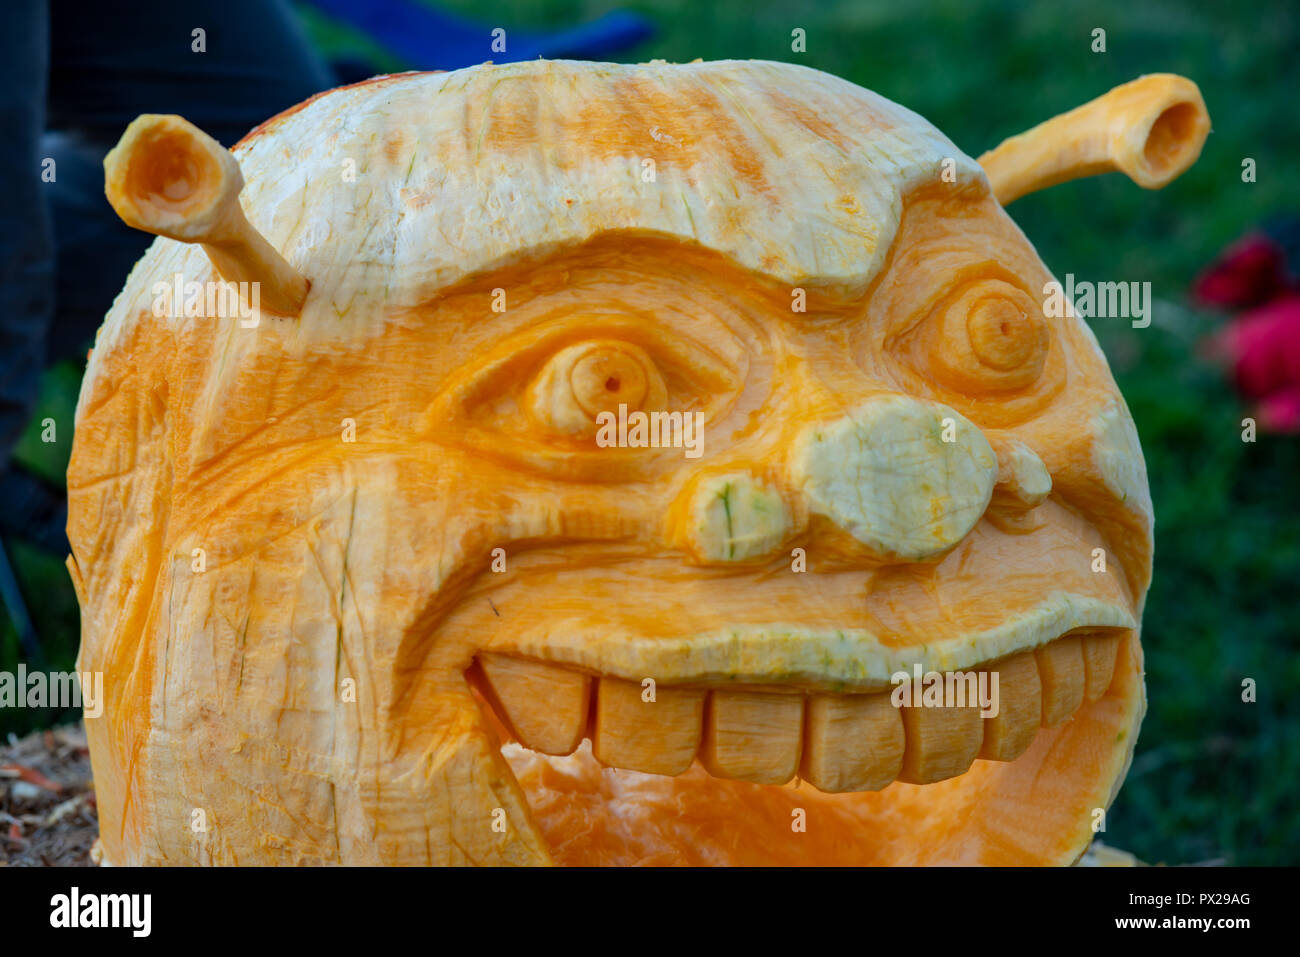 CHADDS FORD, PA - OCTOBER 18: Shrek at The Great Pumpkin Carve carving contest on October 18, 2018 Stock Photo